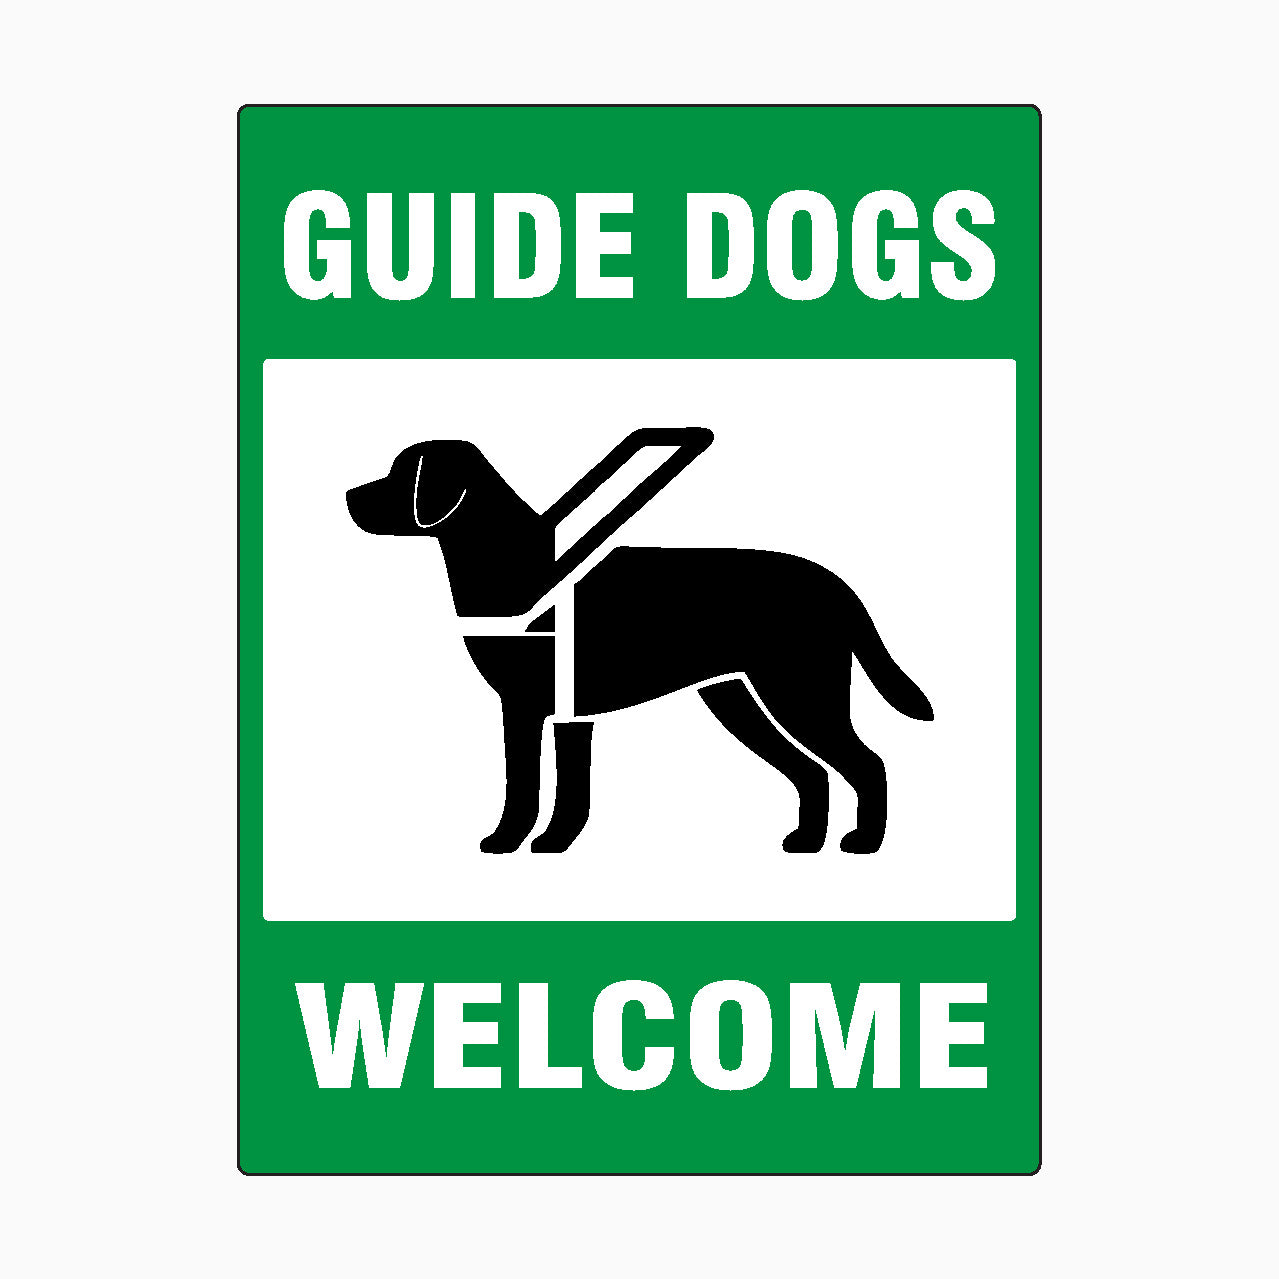 GUIDE DOGS WELCOME SIGN